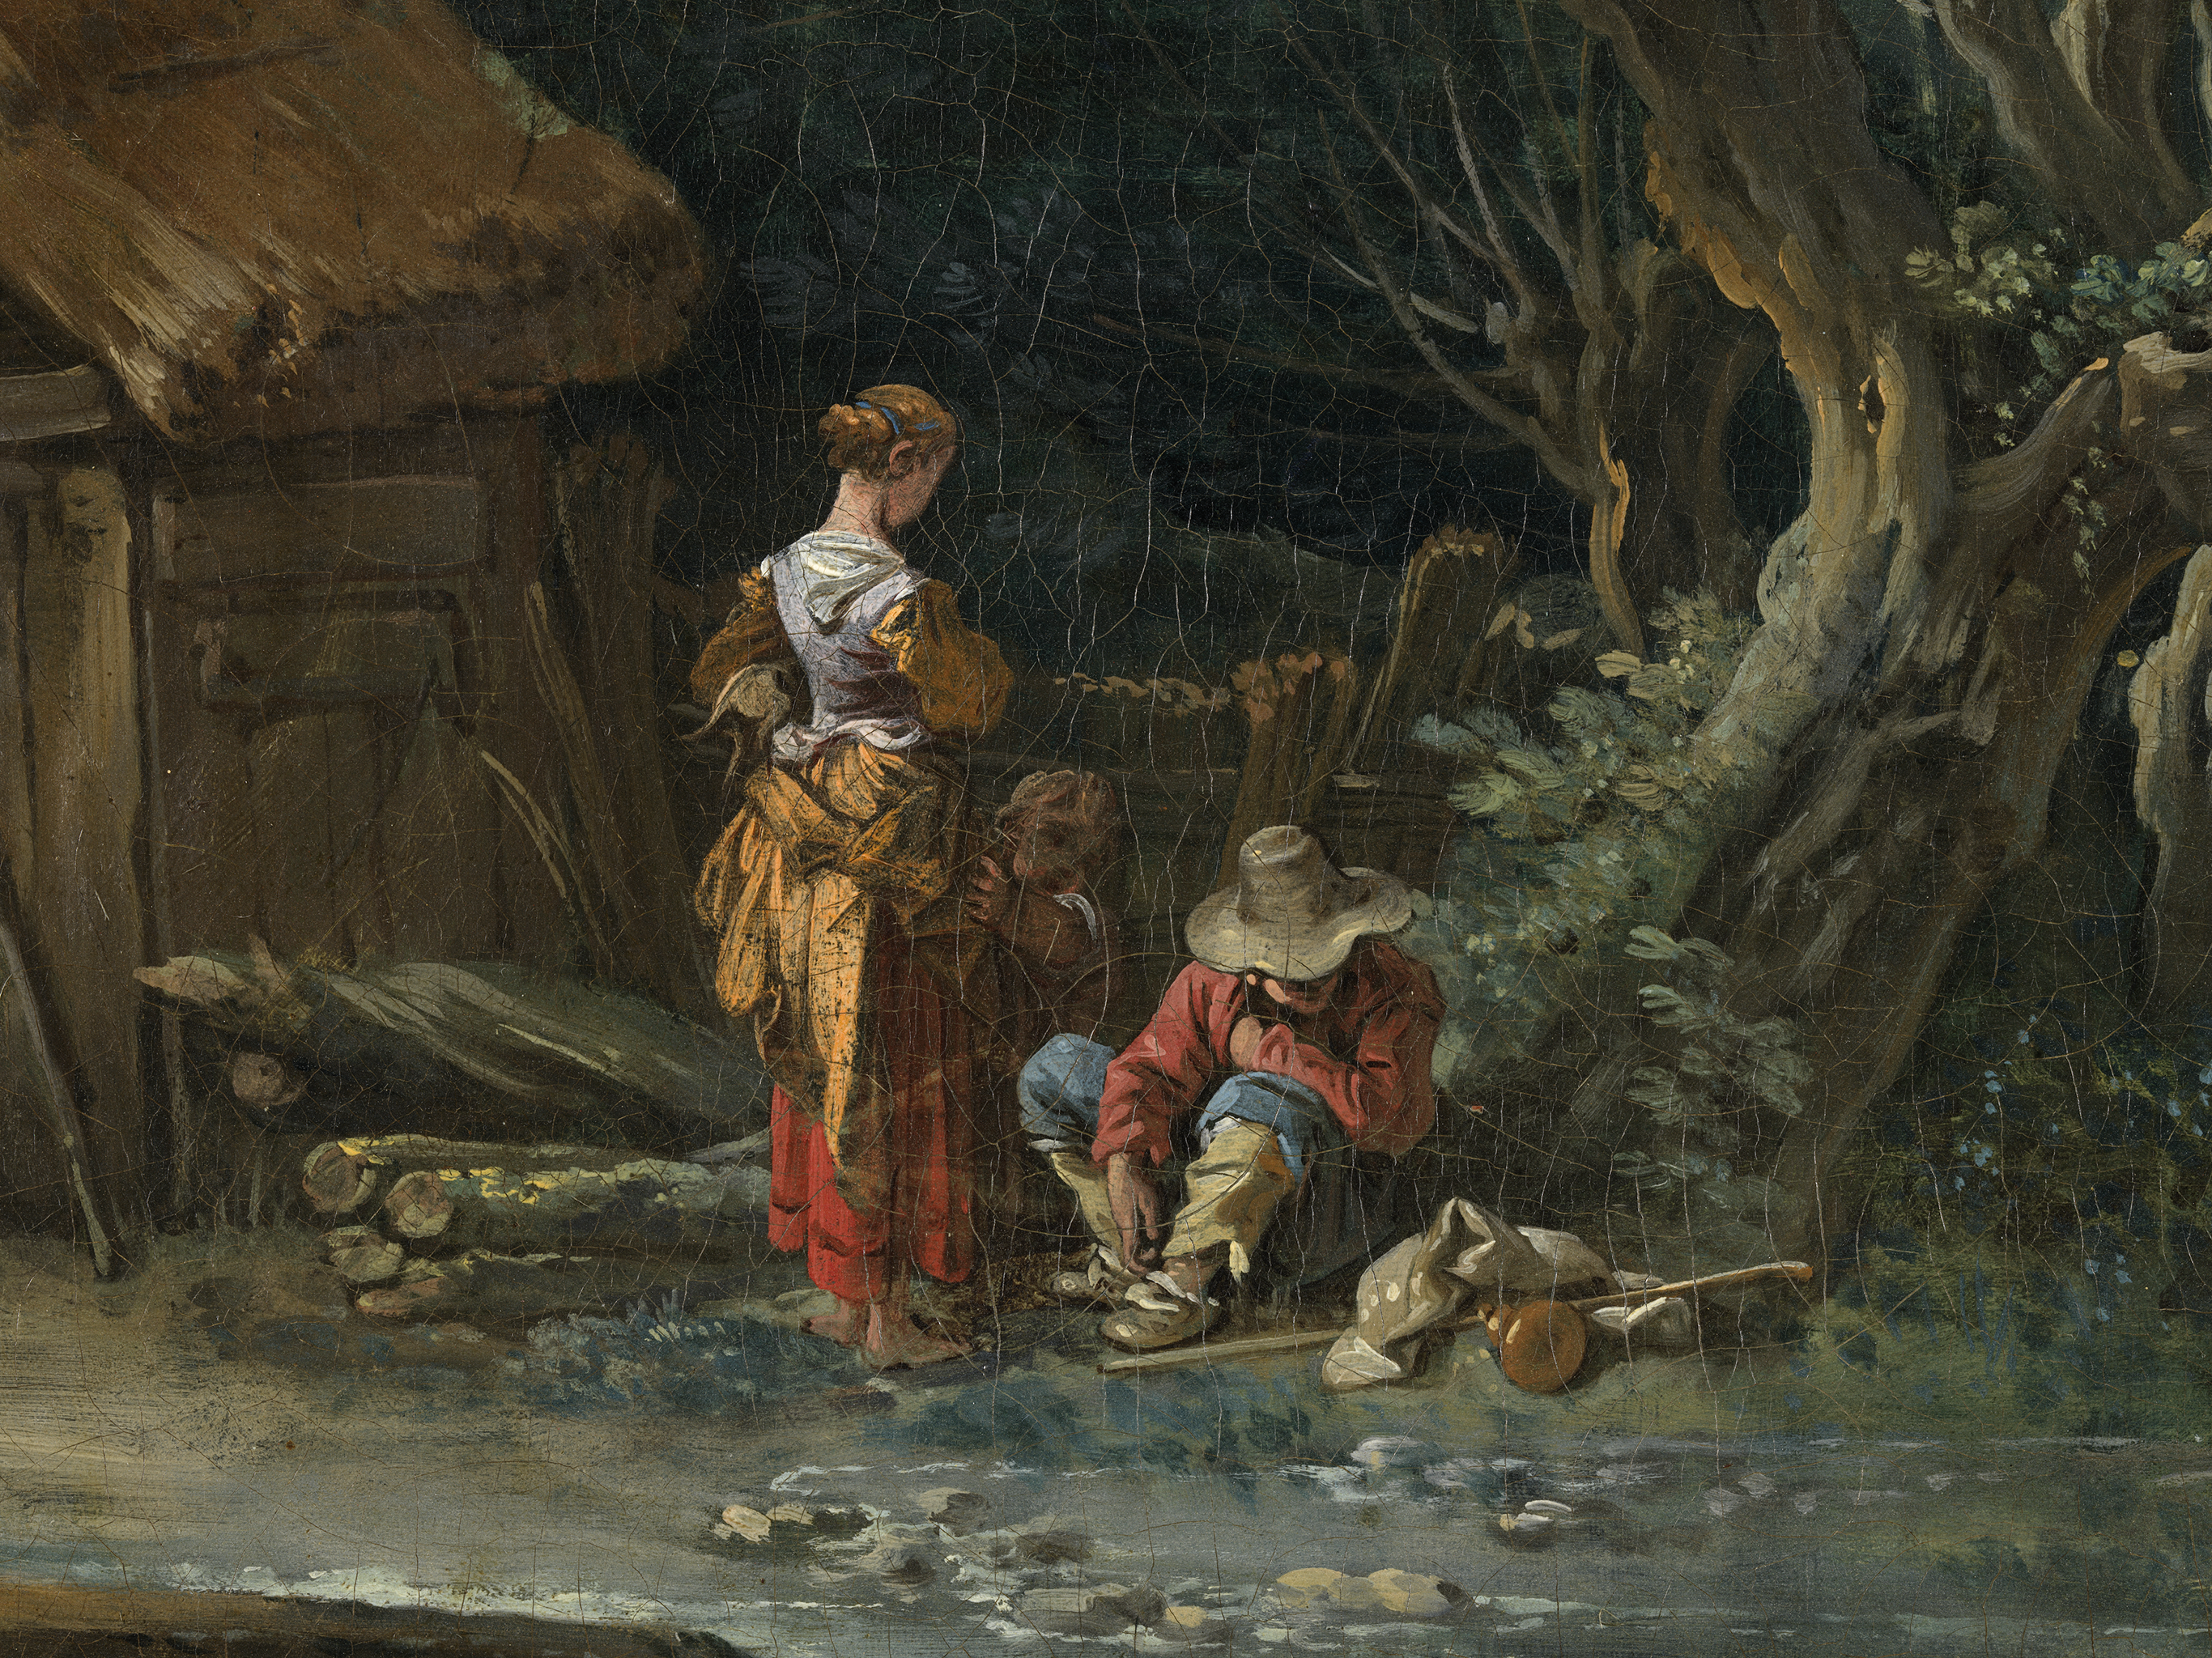 A painting depicting a group of people in a forest near a shed. A woman wearing a yellow and red dress, glances down at a child and a man leaning against the bottom of a brown tree. On the ground, there are an assortment of tools near the man’s feet. The background has the side of a shed with a hay roof next to a wooden fence.